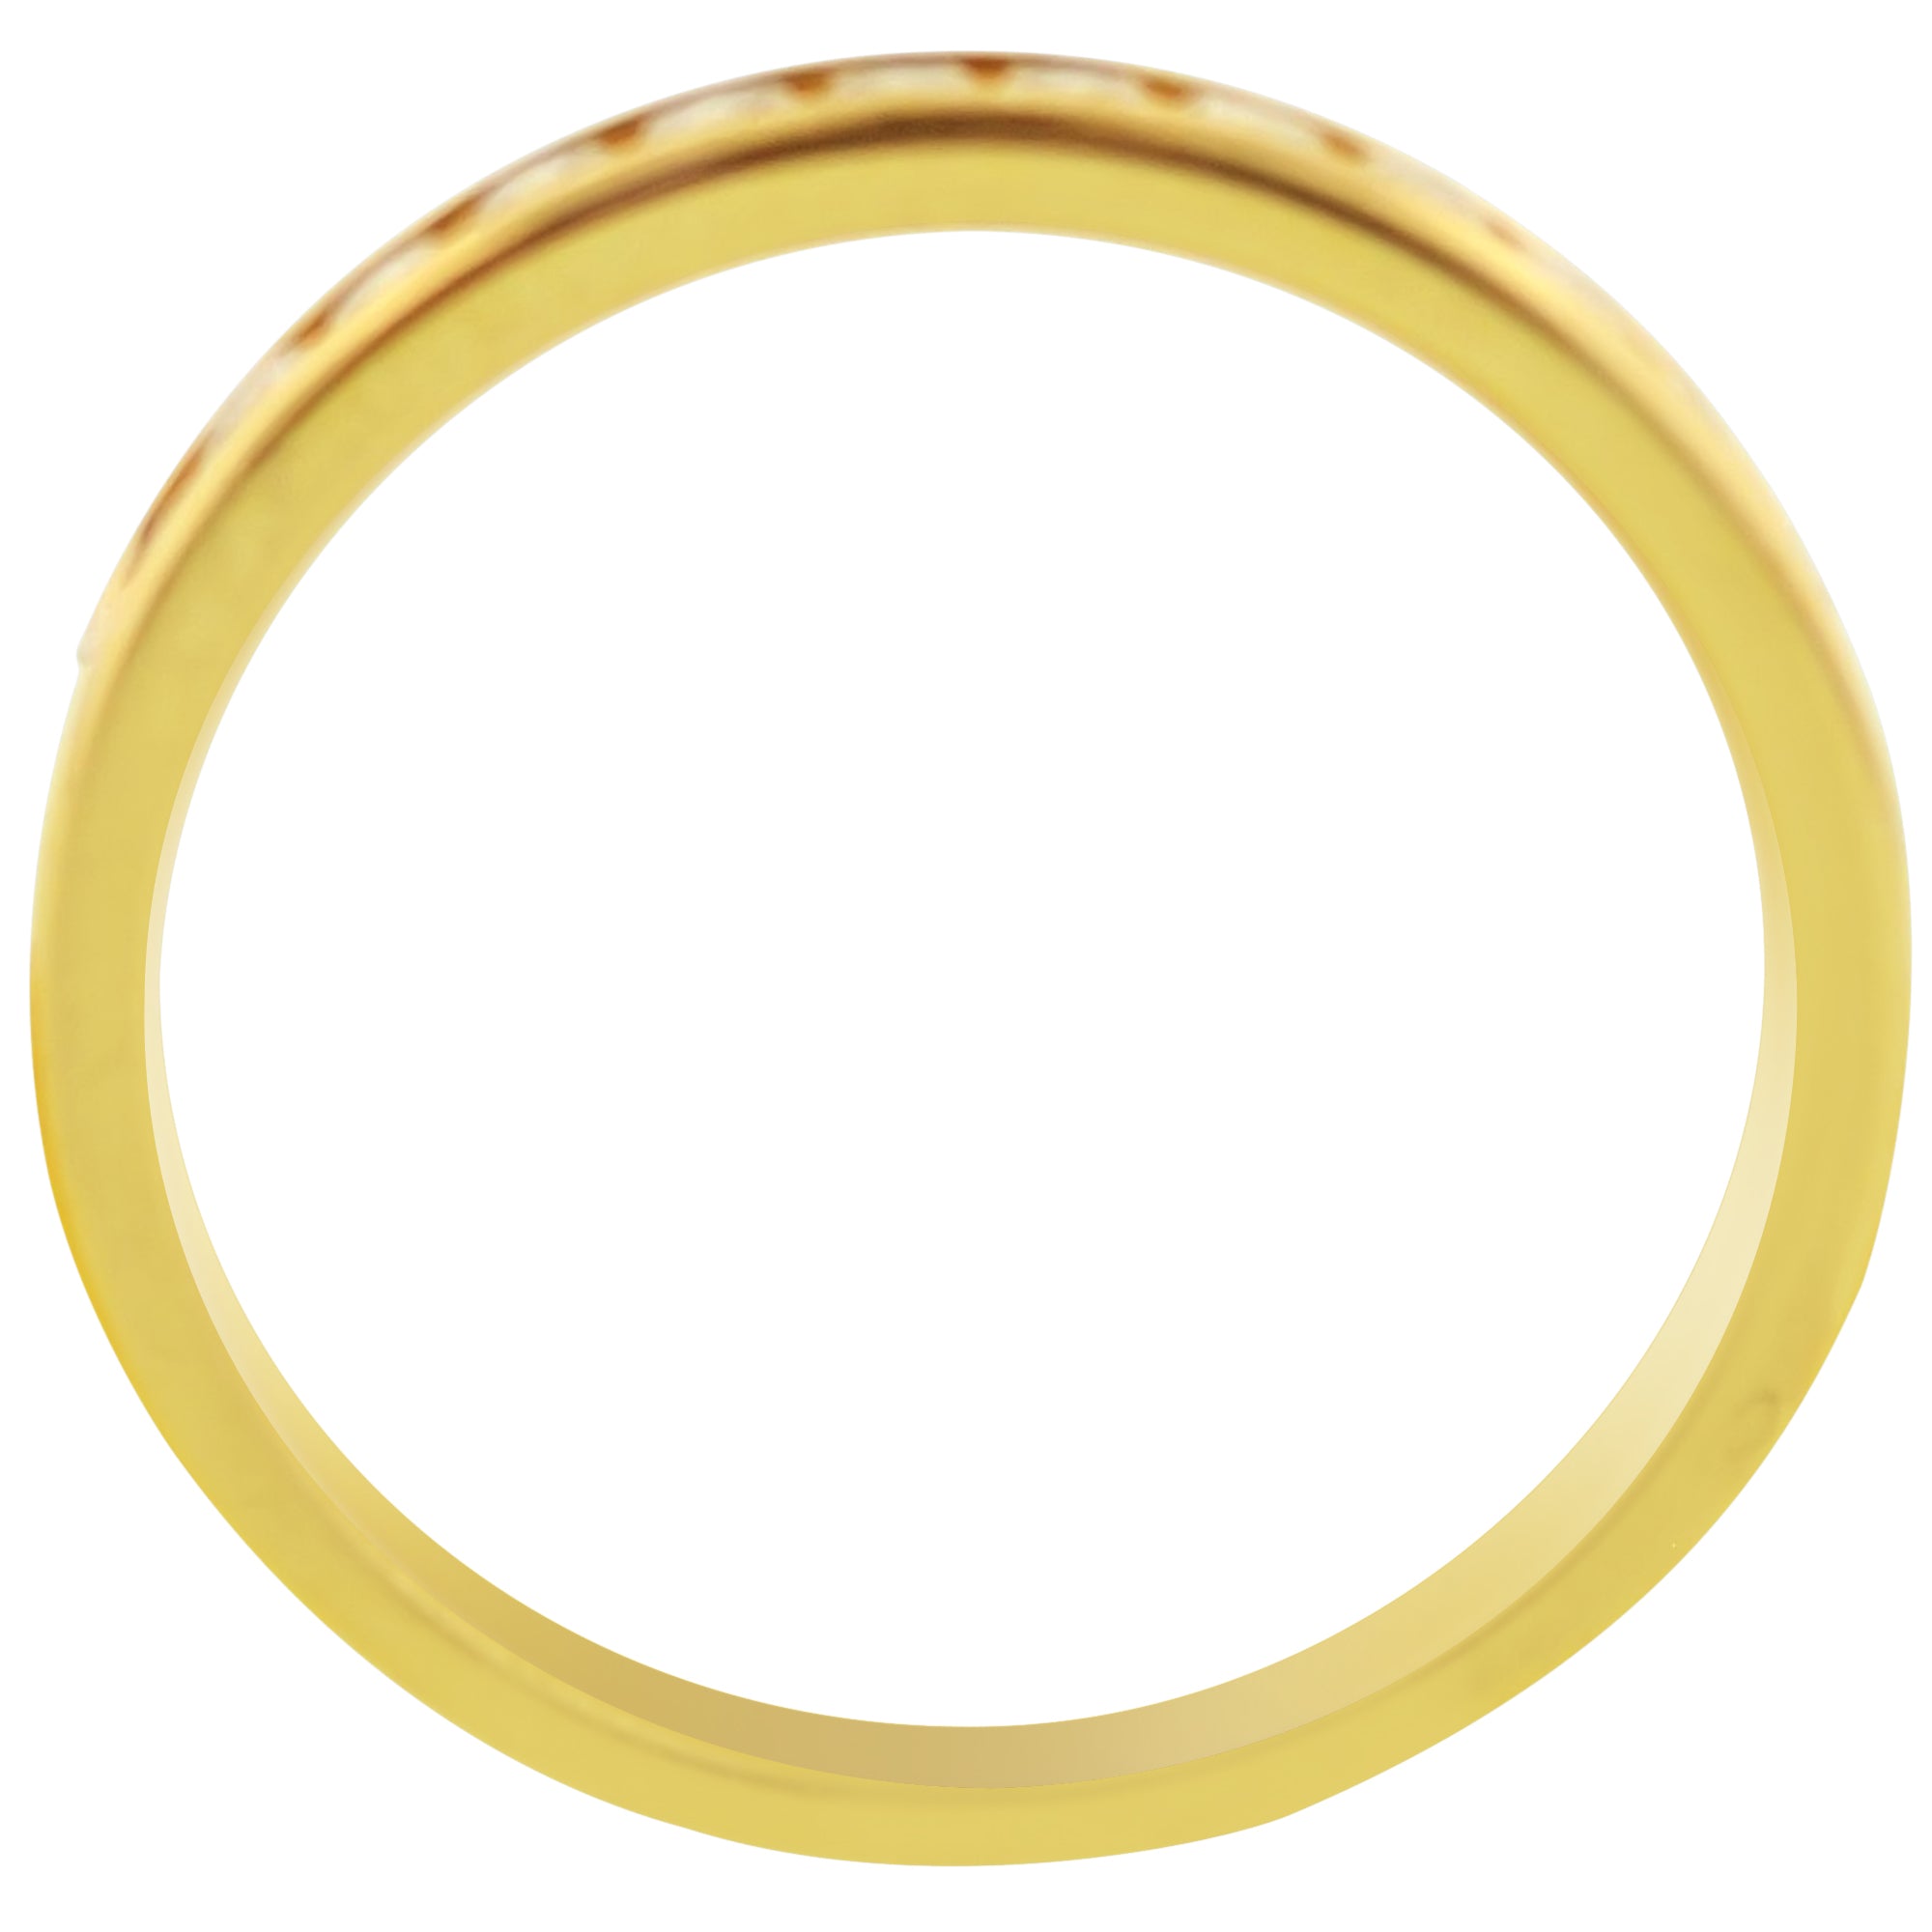 Northern Star Diamond Anniversary Band in 14kt Yellow Gold (1/3ct tw)